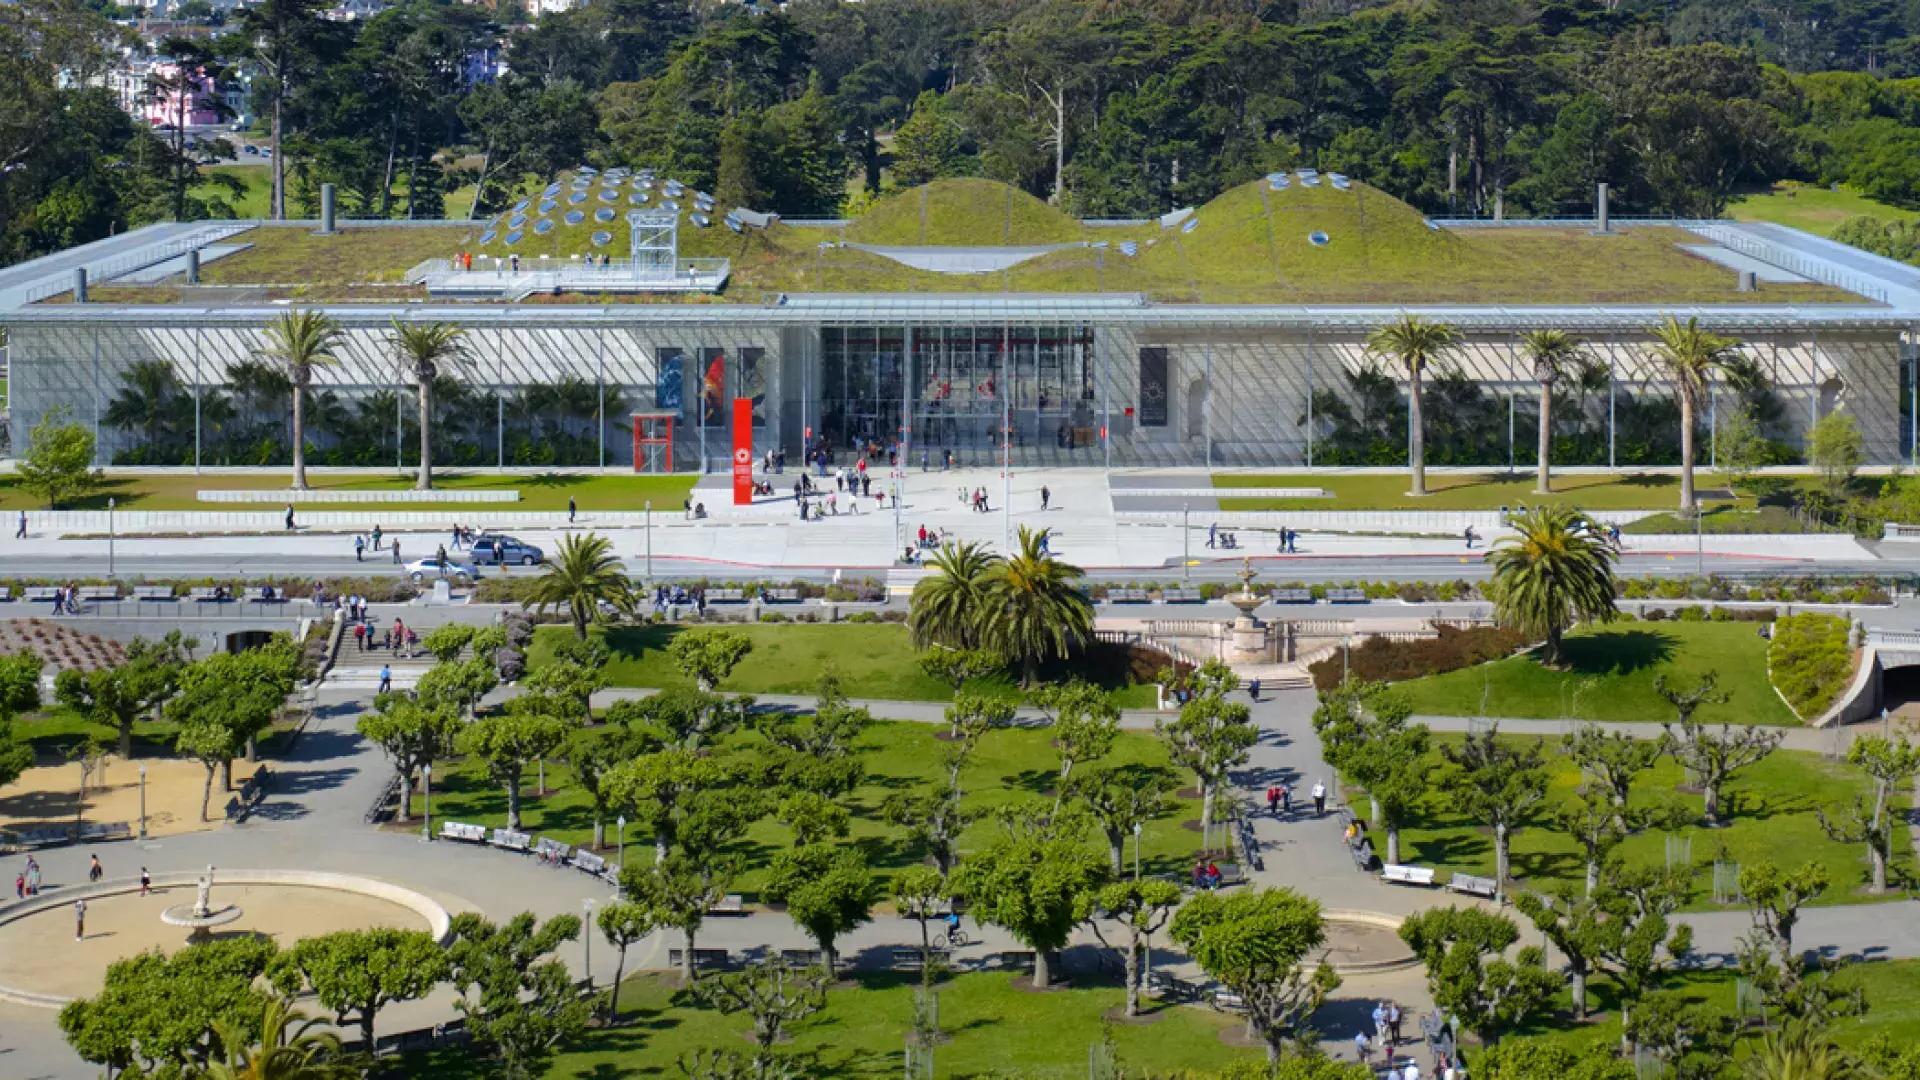 The outside of the California Academy of Sciences.